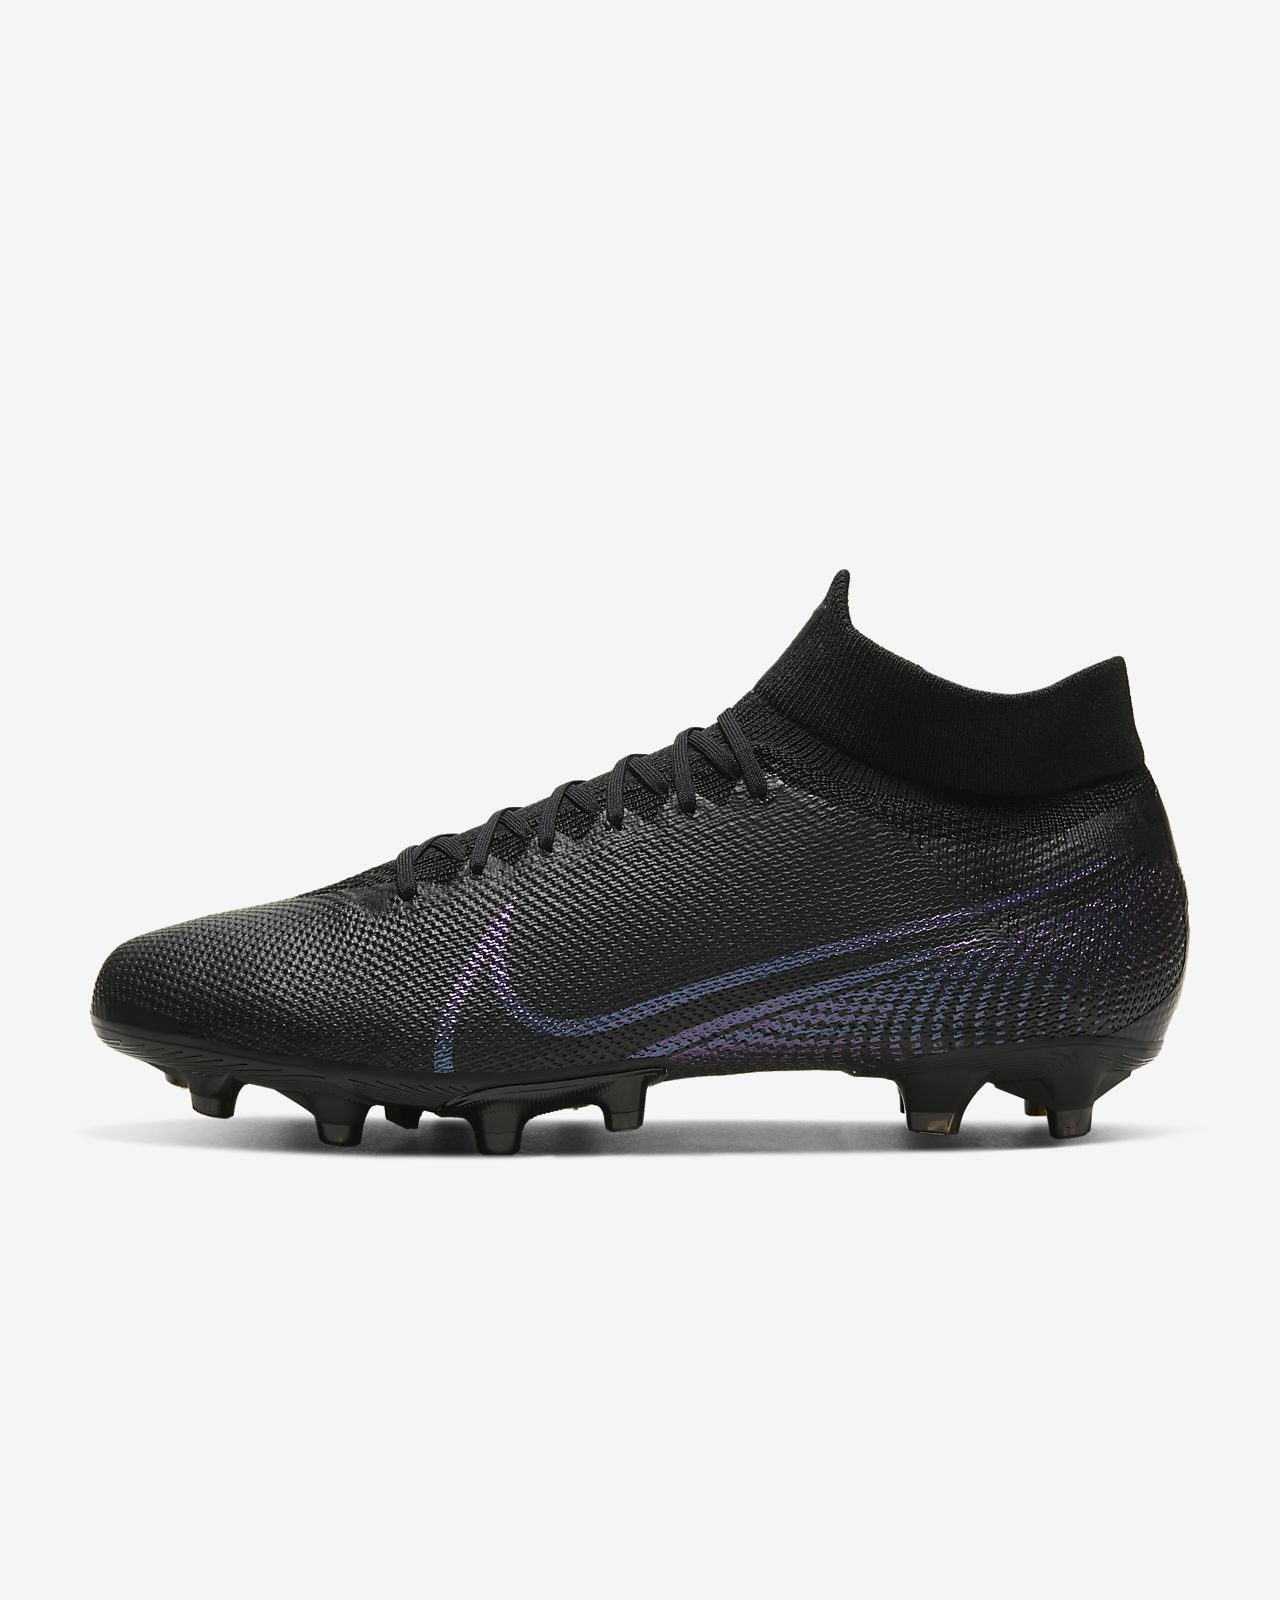 Nike Mercurial Superfly Pro football boots Football store.